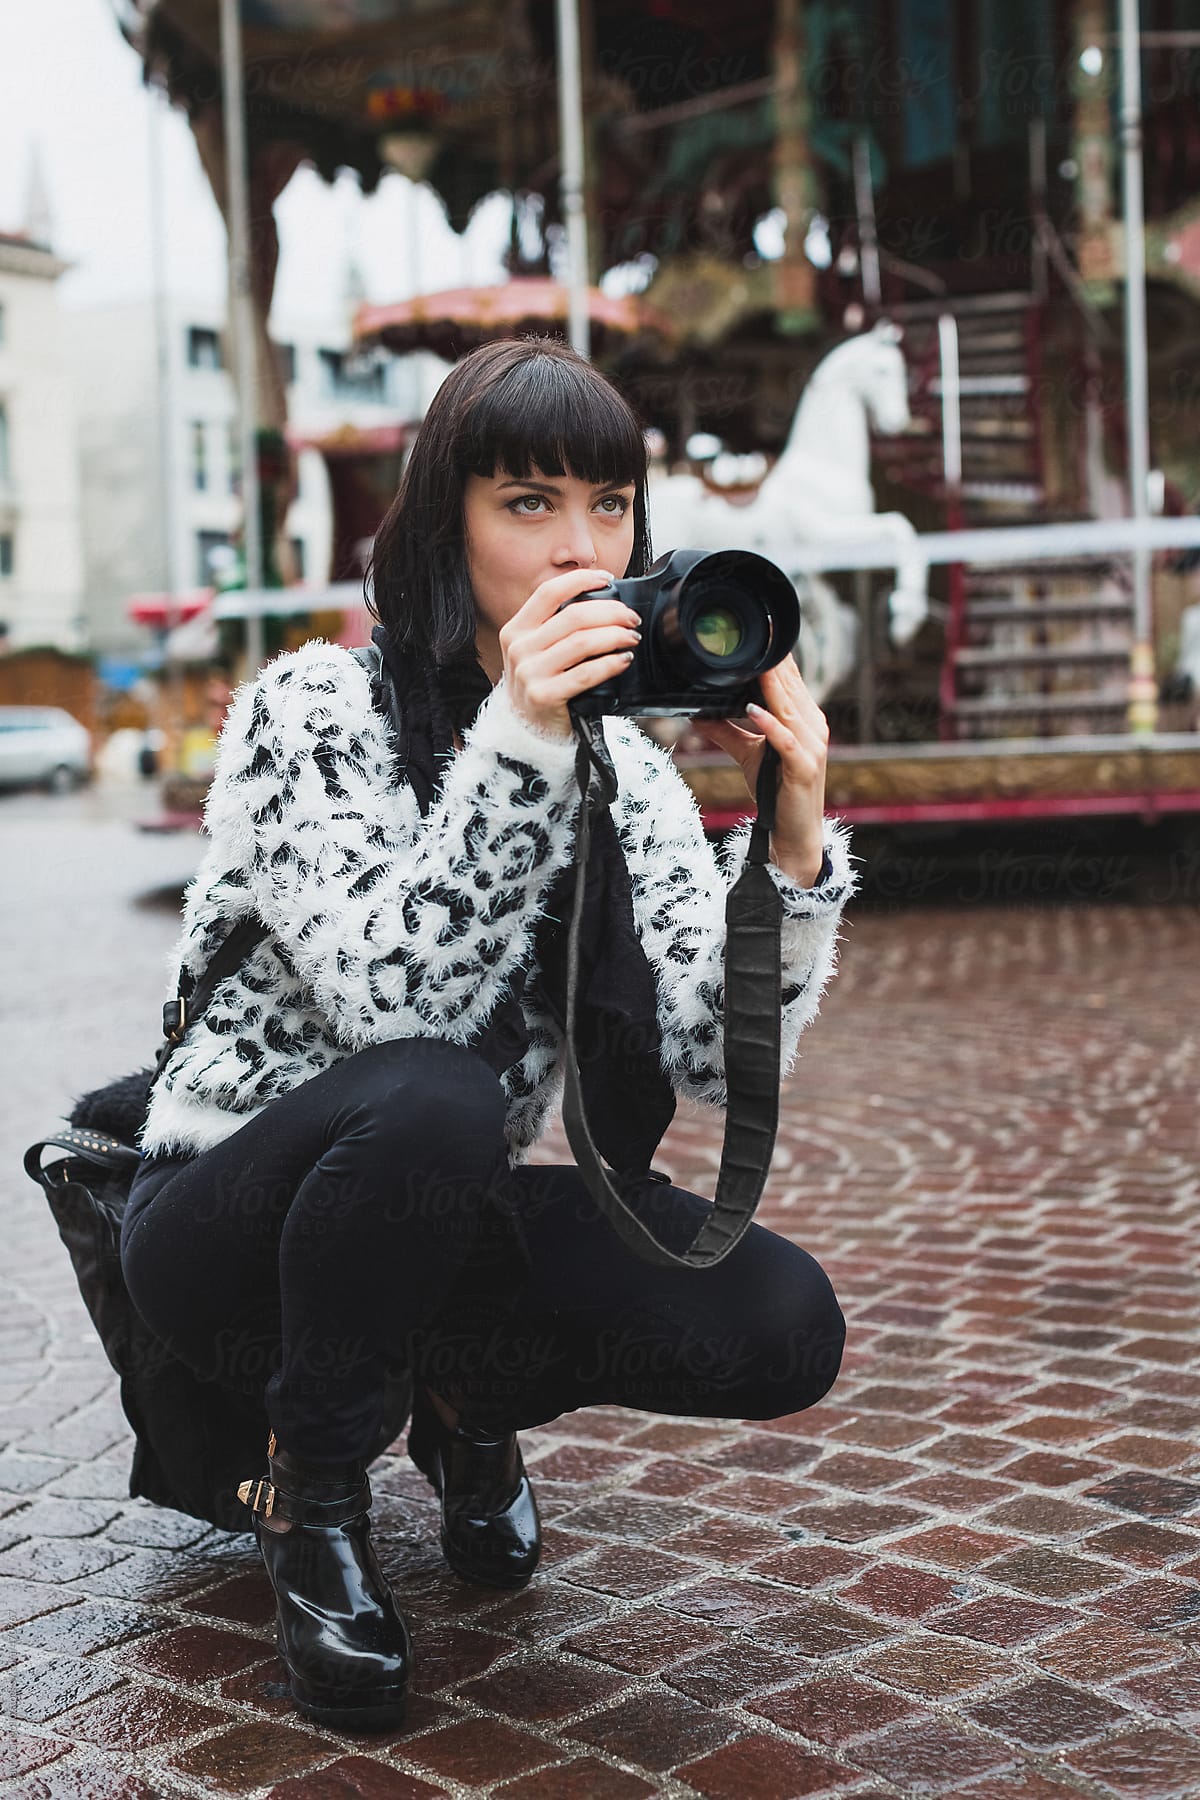 Female Photographer Taking Pictures Outdoor By Stocksy Contributor Mauro Grigollo Stocksy